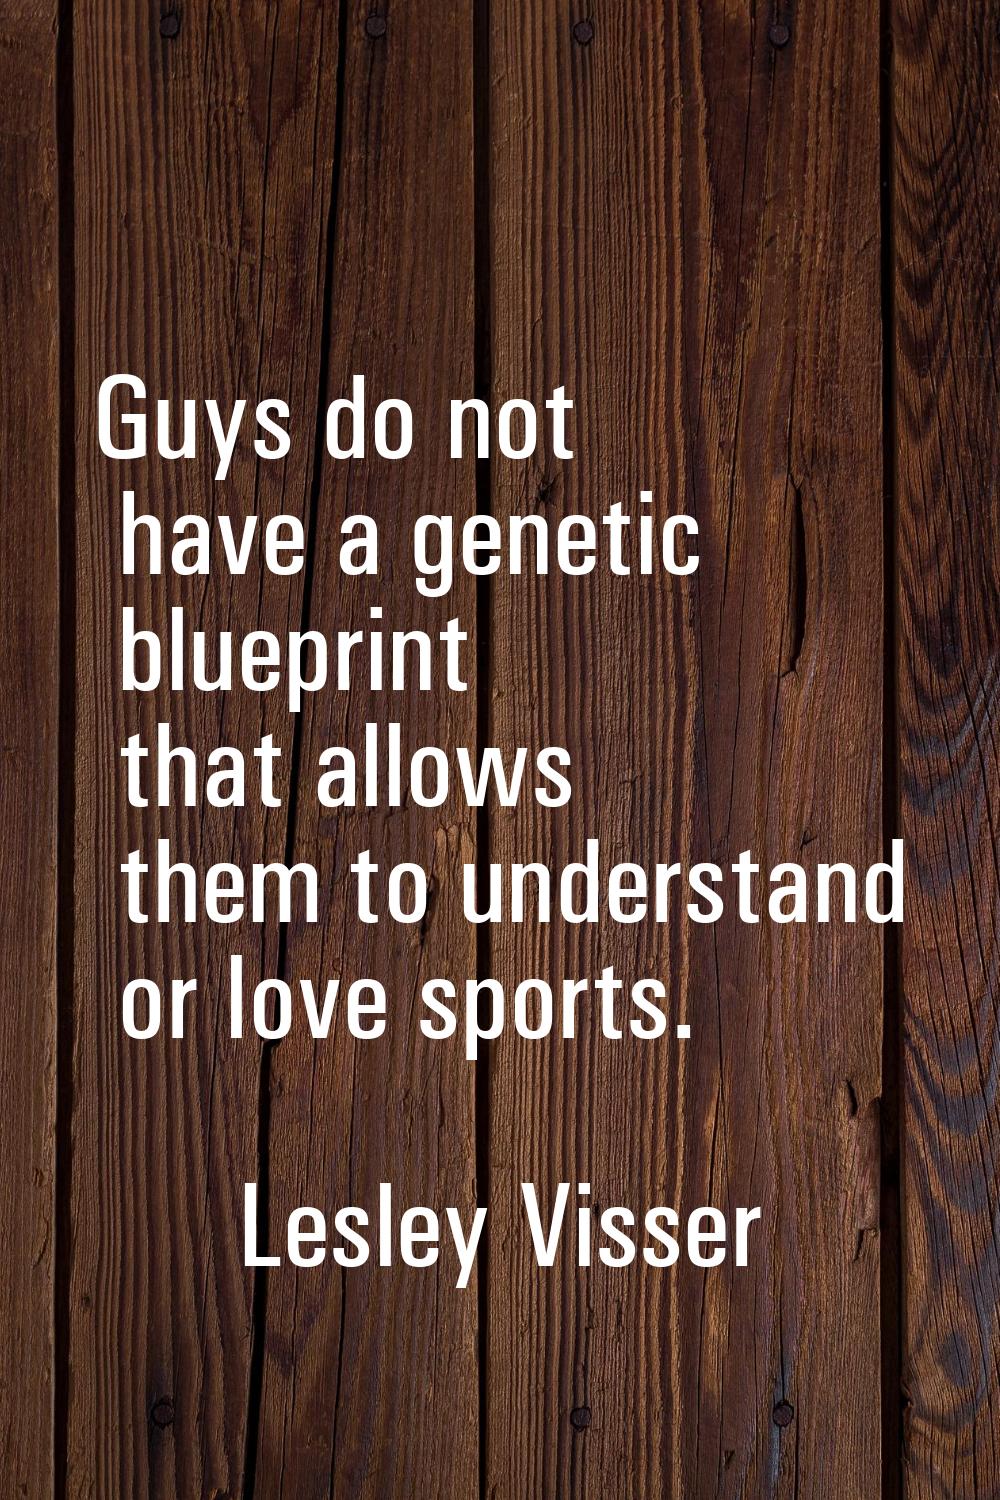 Guys do not have a genetic blueprint that allows them to understand or love sports.